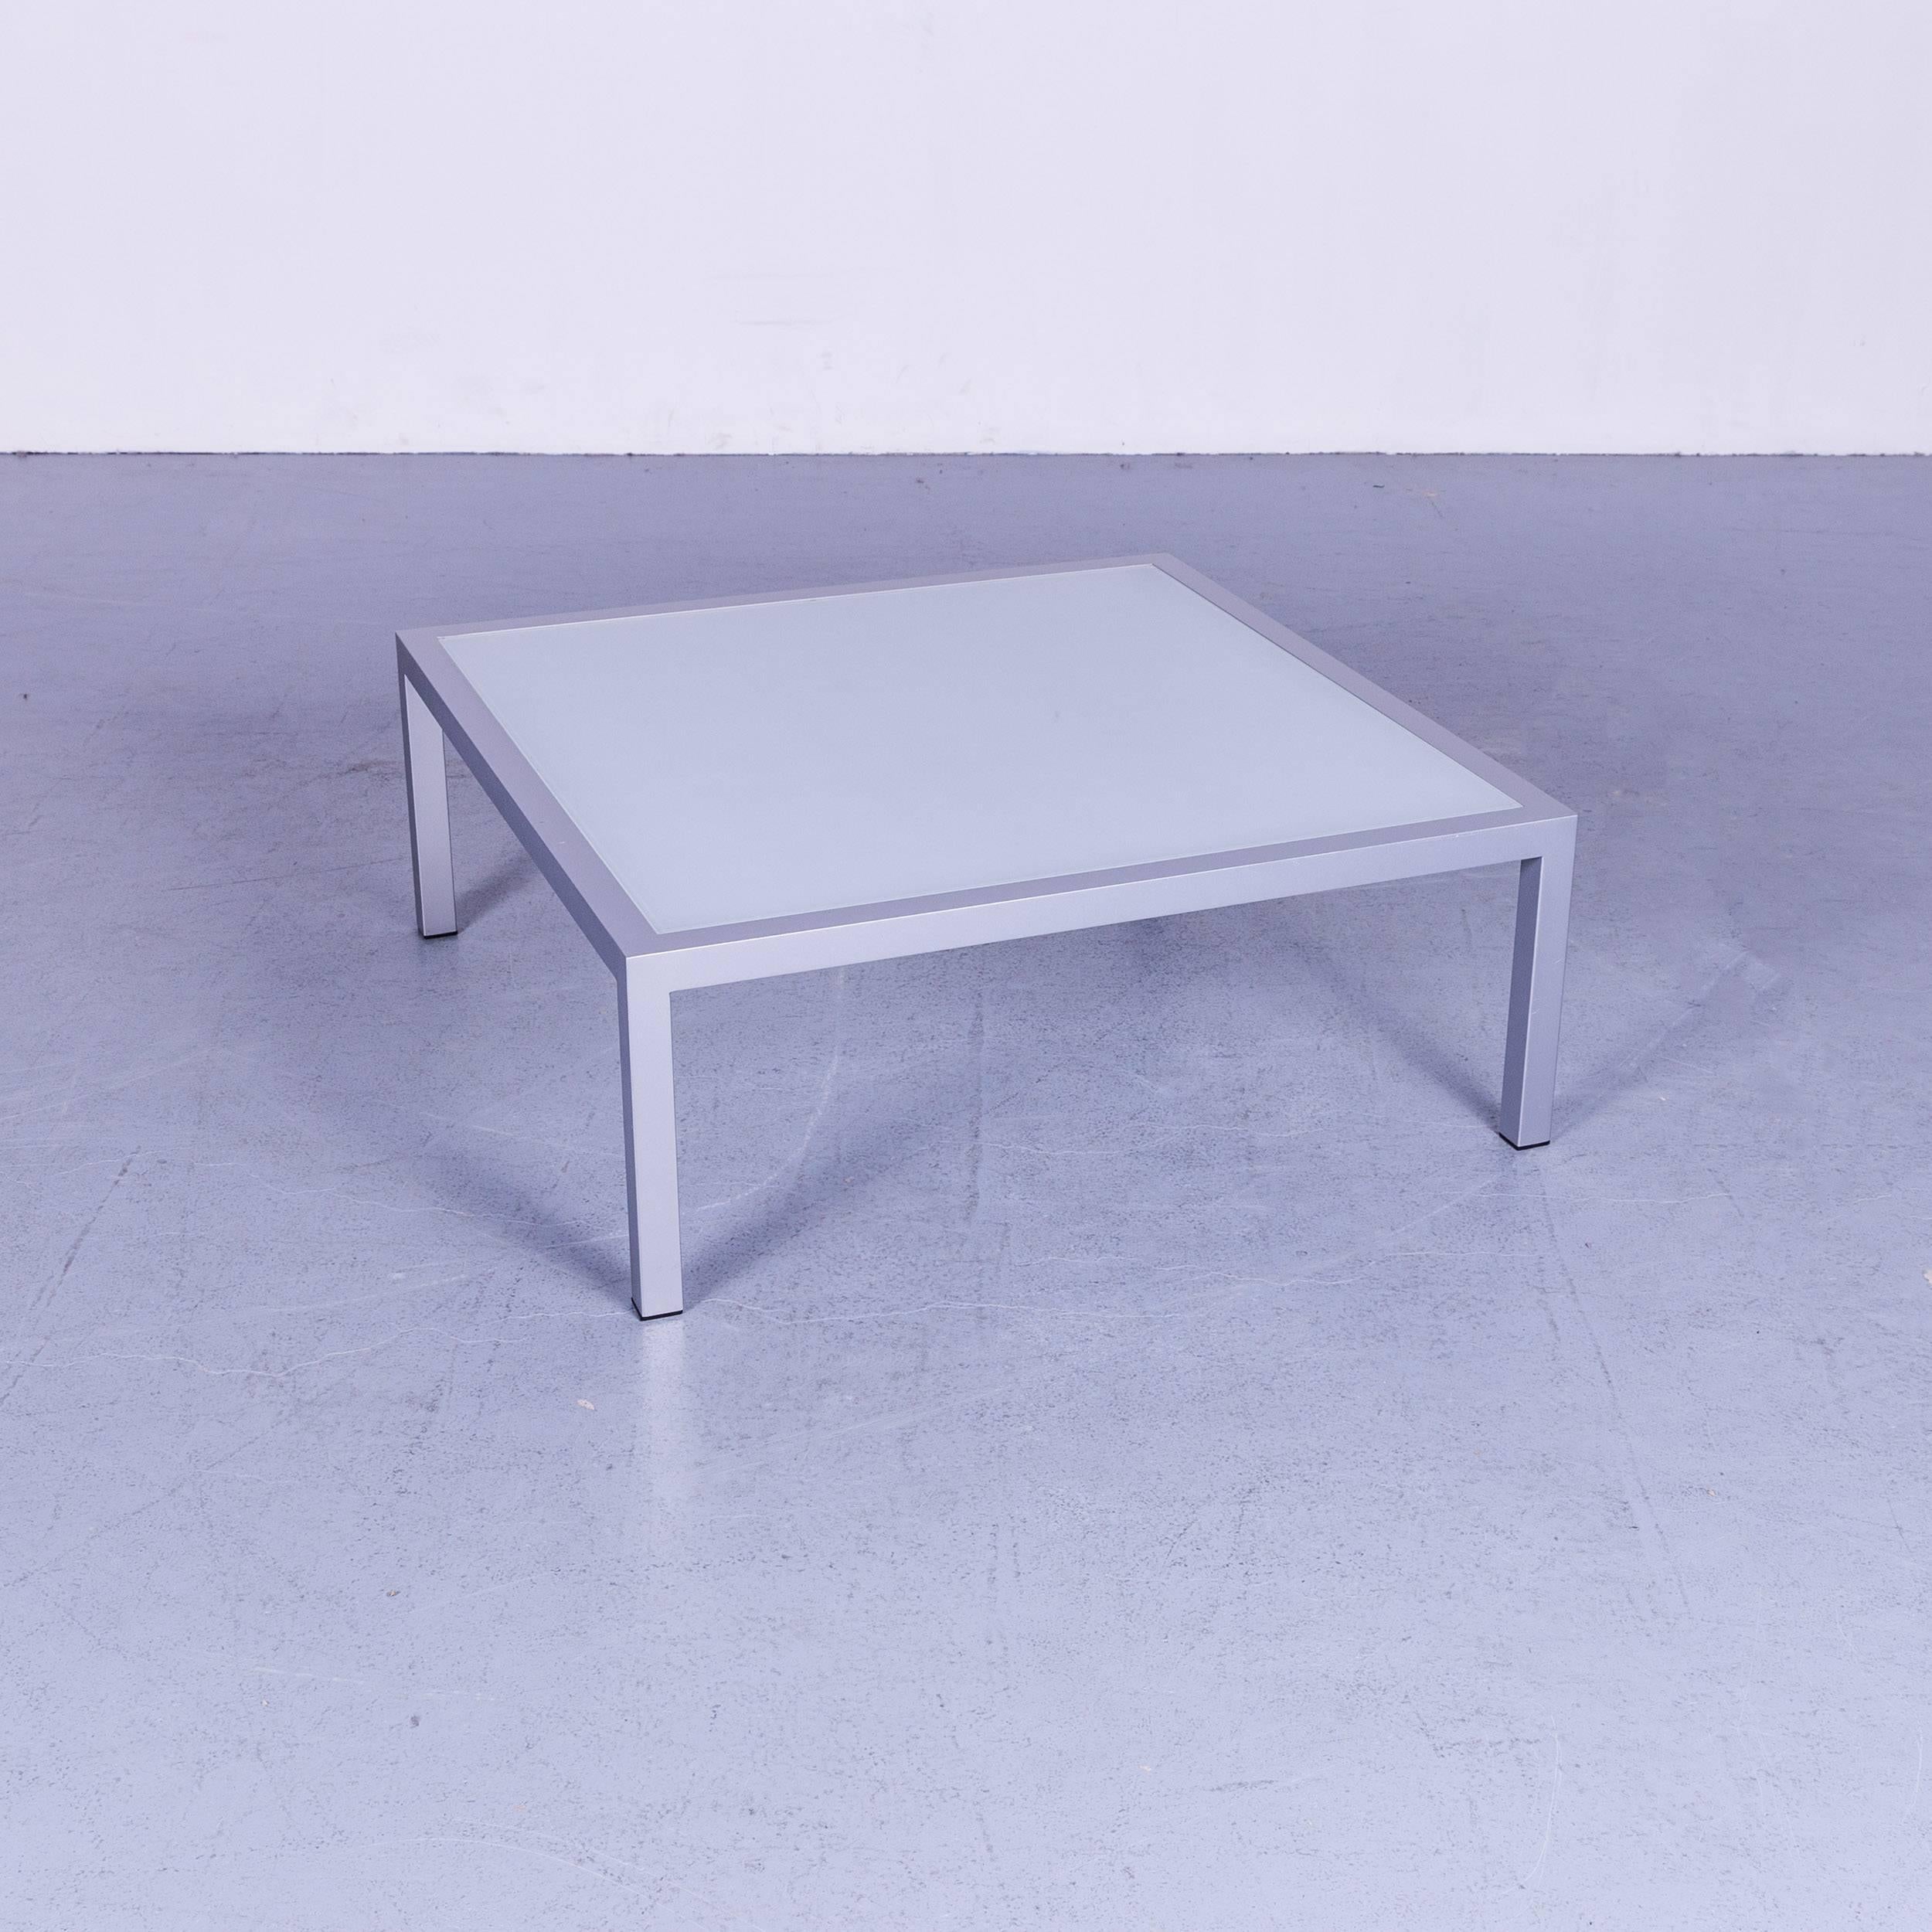 Modern style glass table made of high materials.